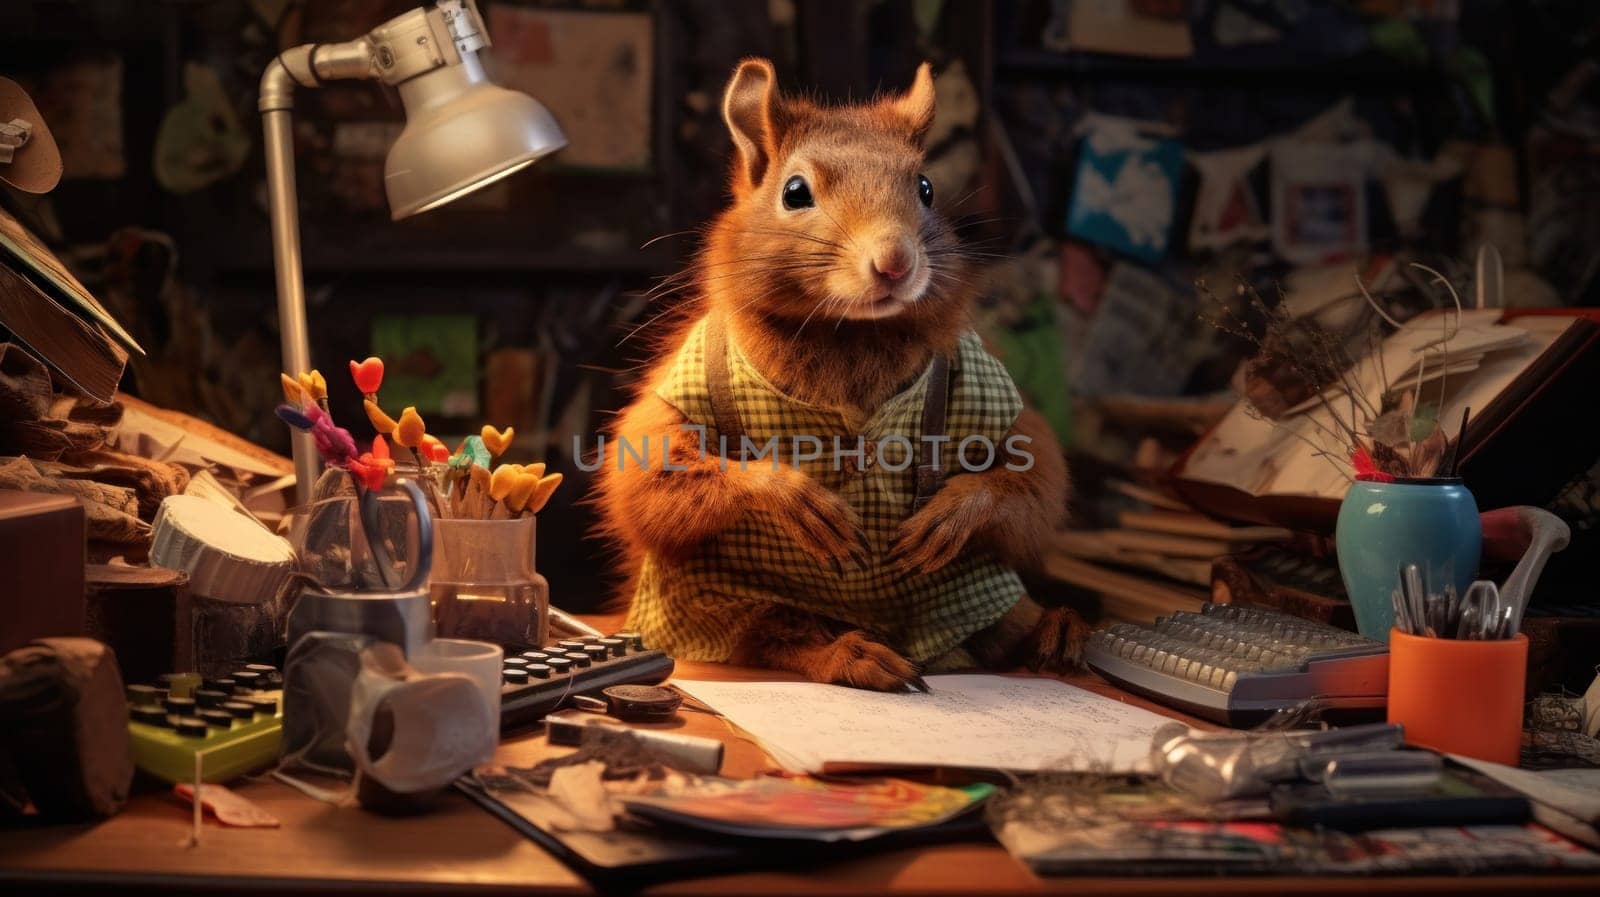 A squirrel sitting on a desk with papers and other items, AI by starush